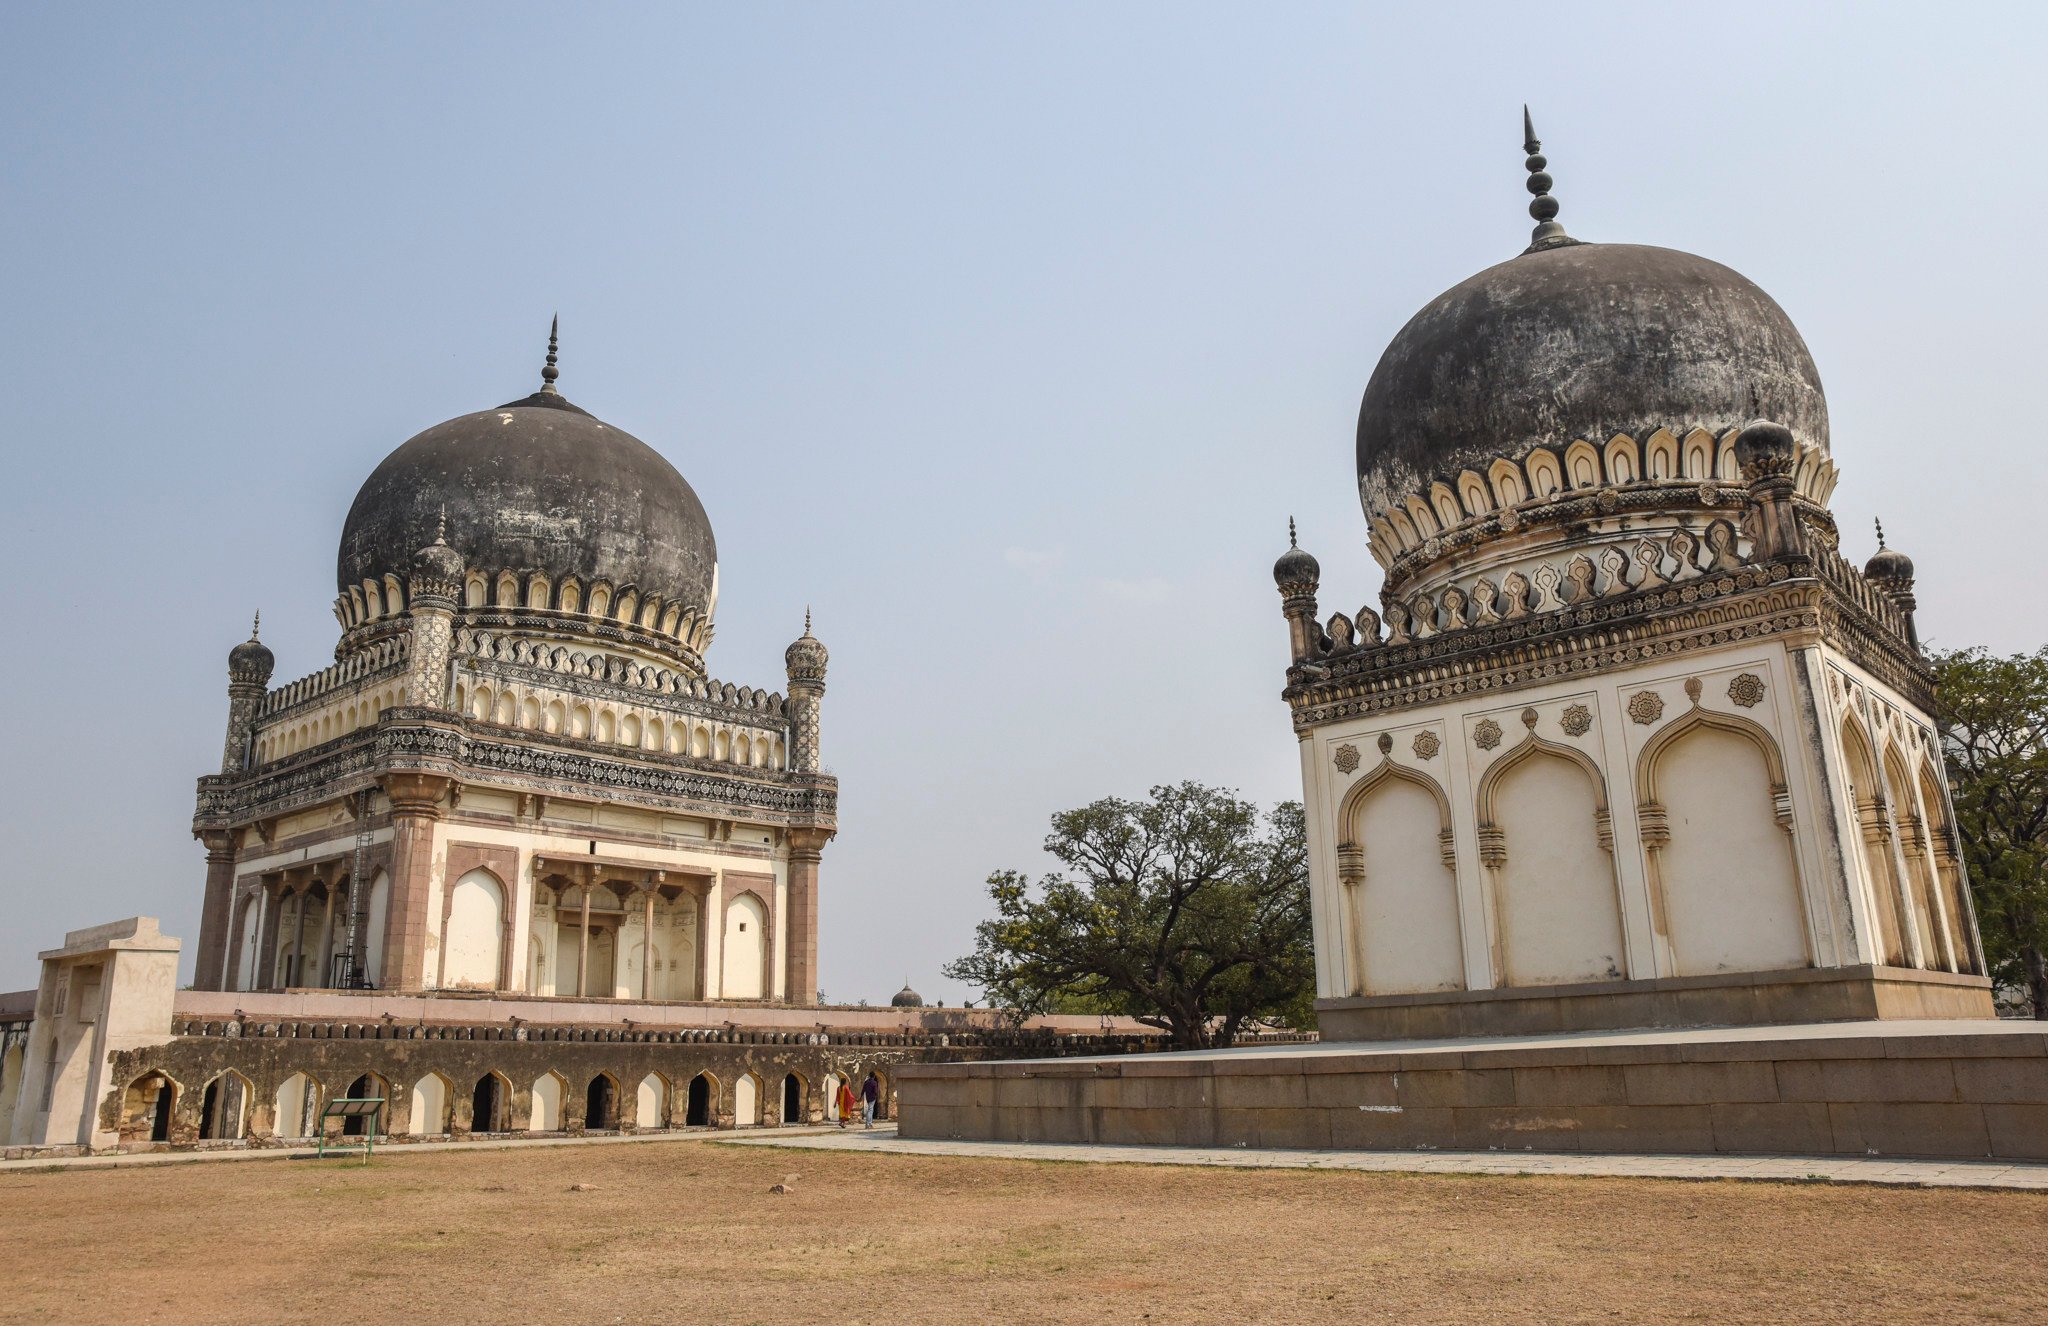 Mausoleums at the Qutb Shahi Heritage Park in Hyderabad. The site’s transformation has made it one of the best places to visit in India. Photo: Ronan O’Connell